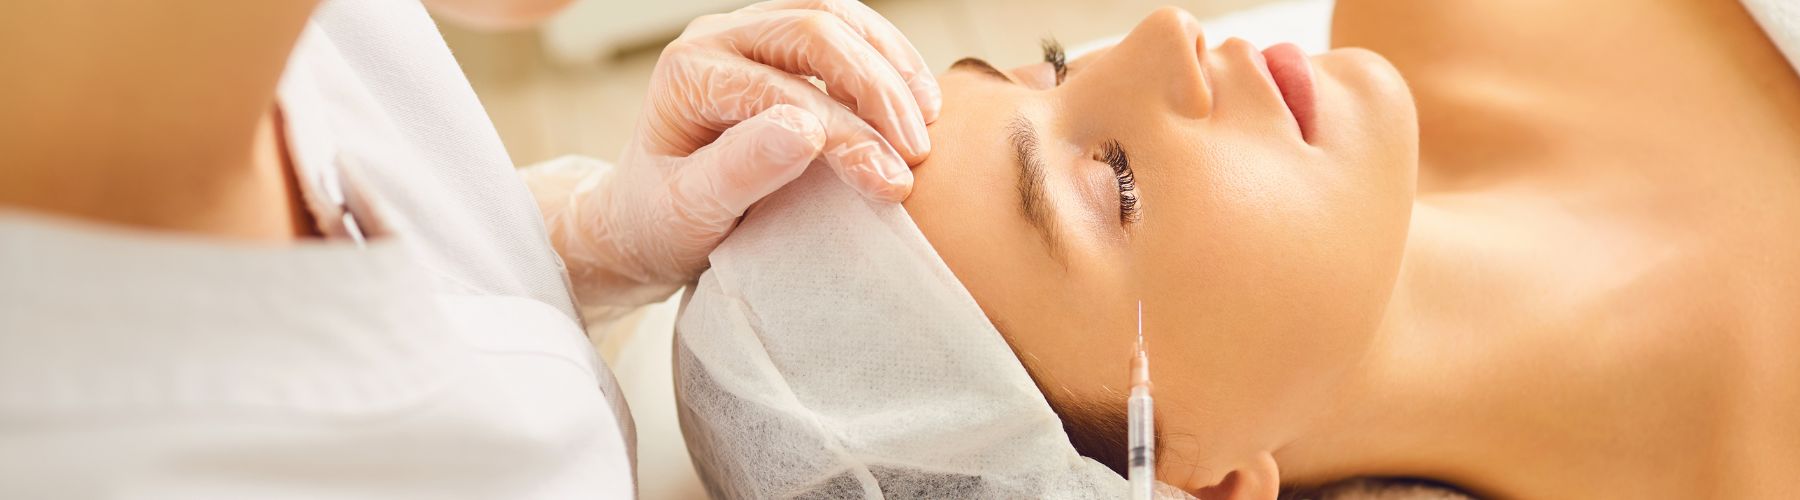 How To Become a Botox Injector in the UK